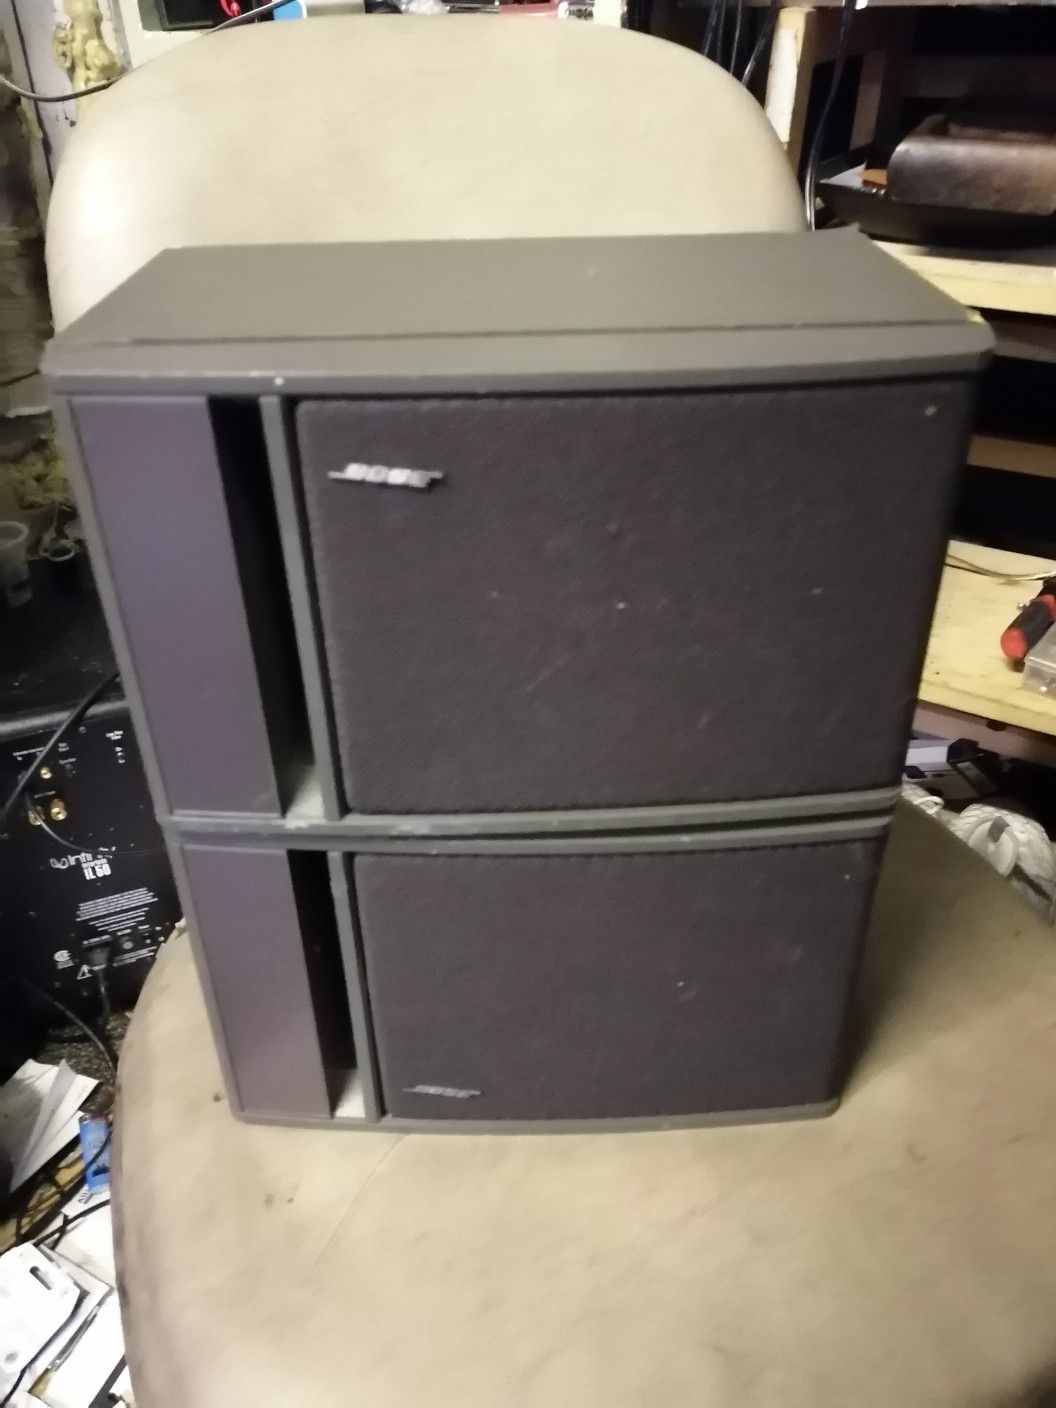 2x Bose model 141 pair for sale good condition